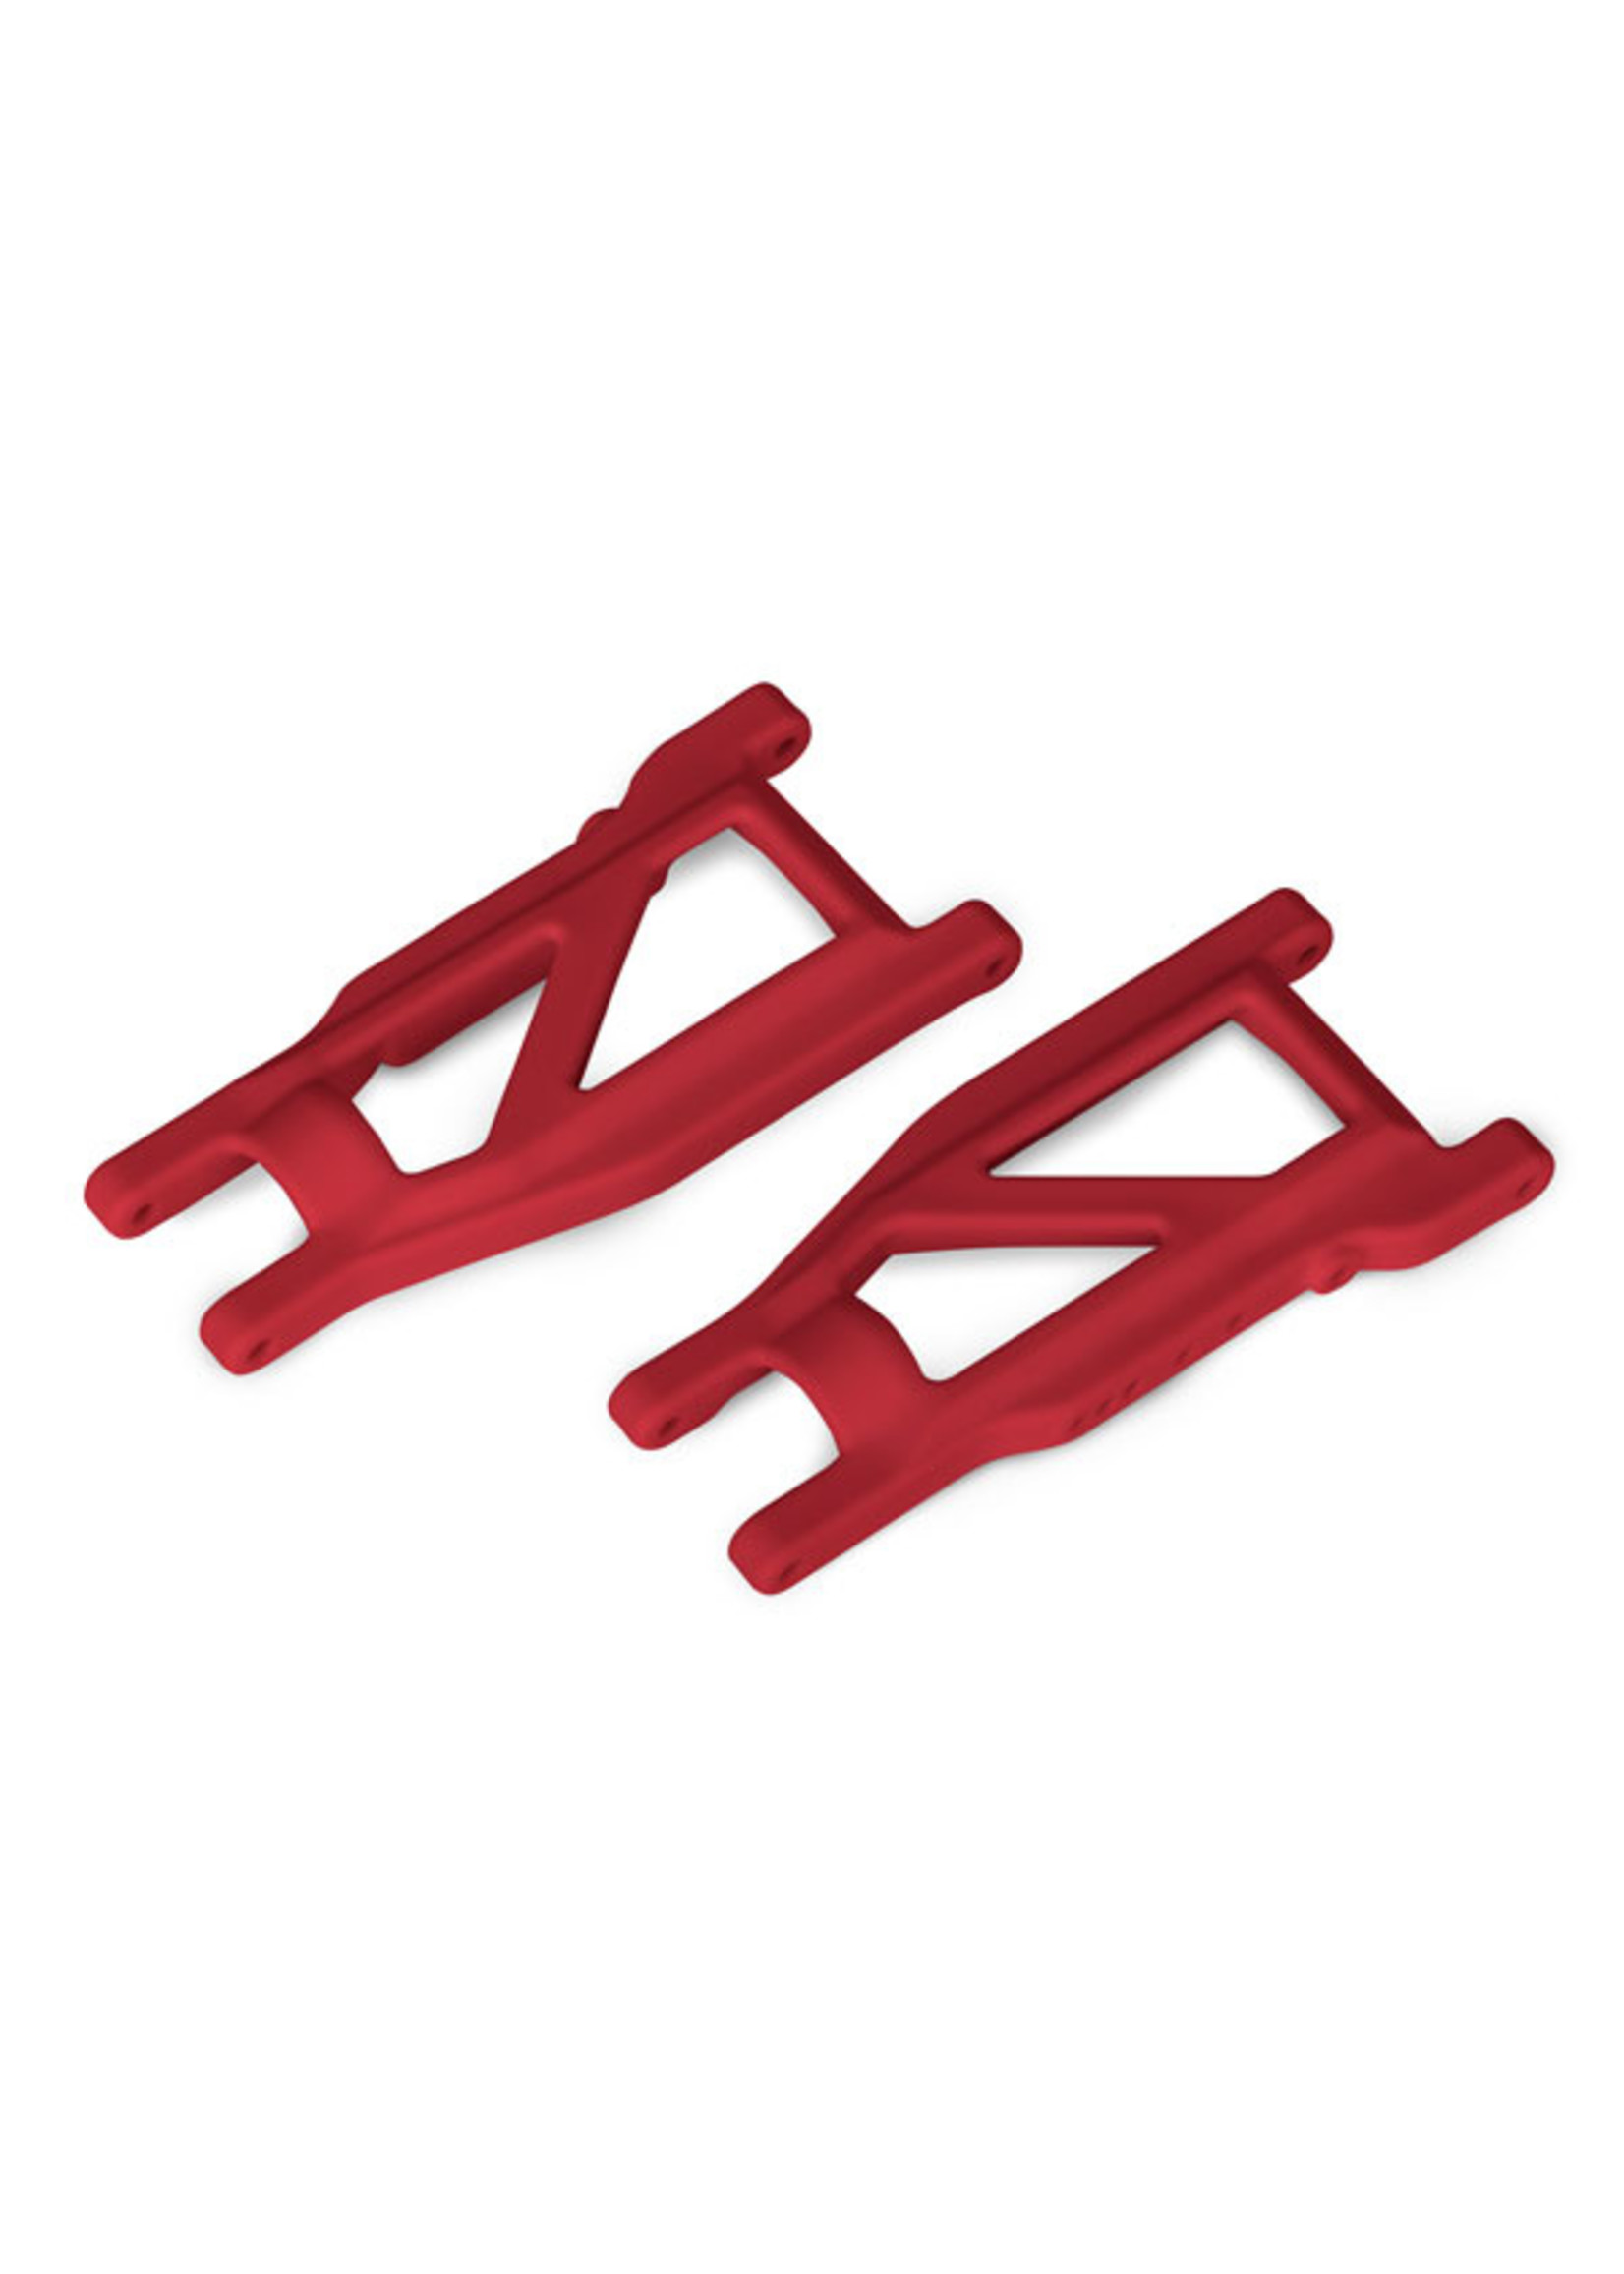 Traxxas 3655L - Heavy Duty Suspension Arms - Red